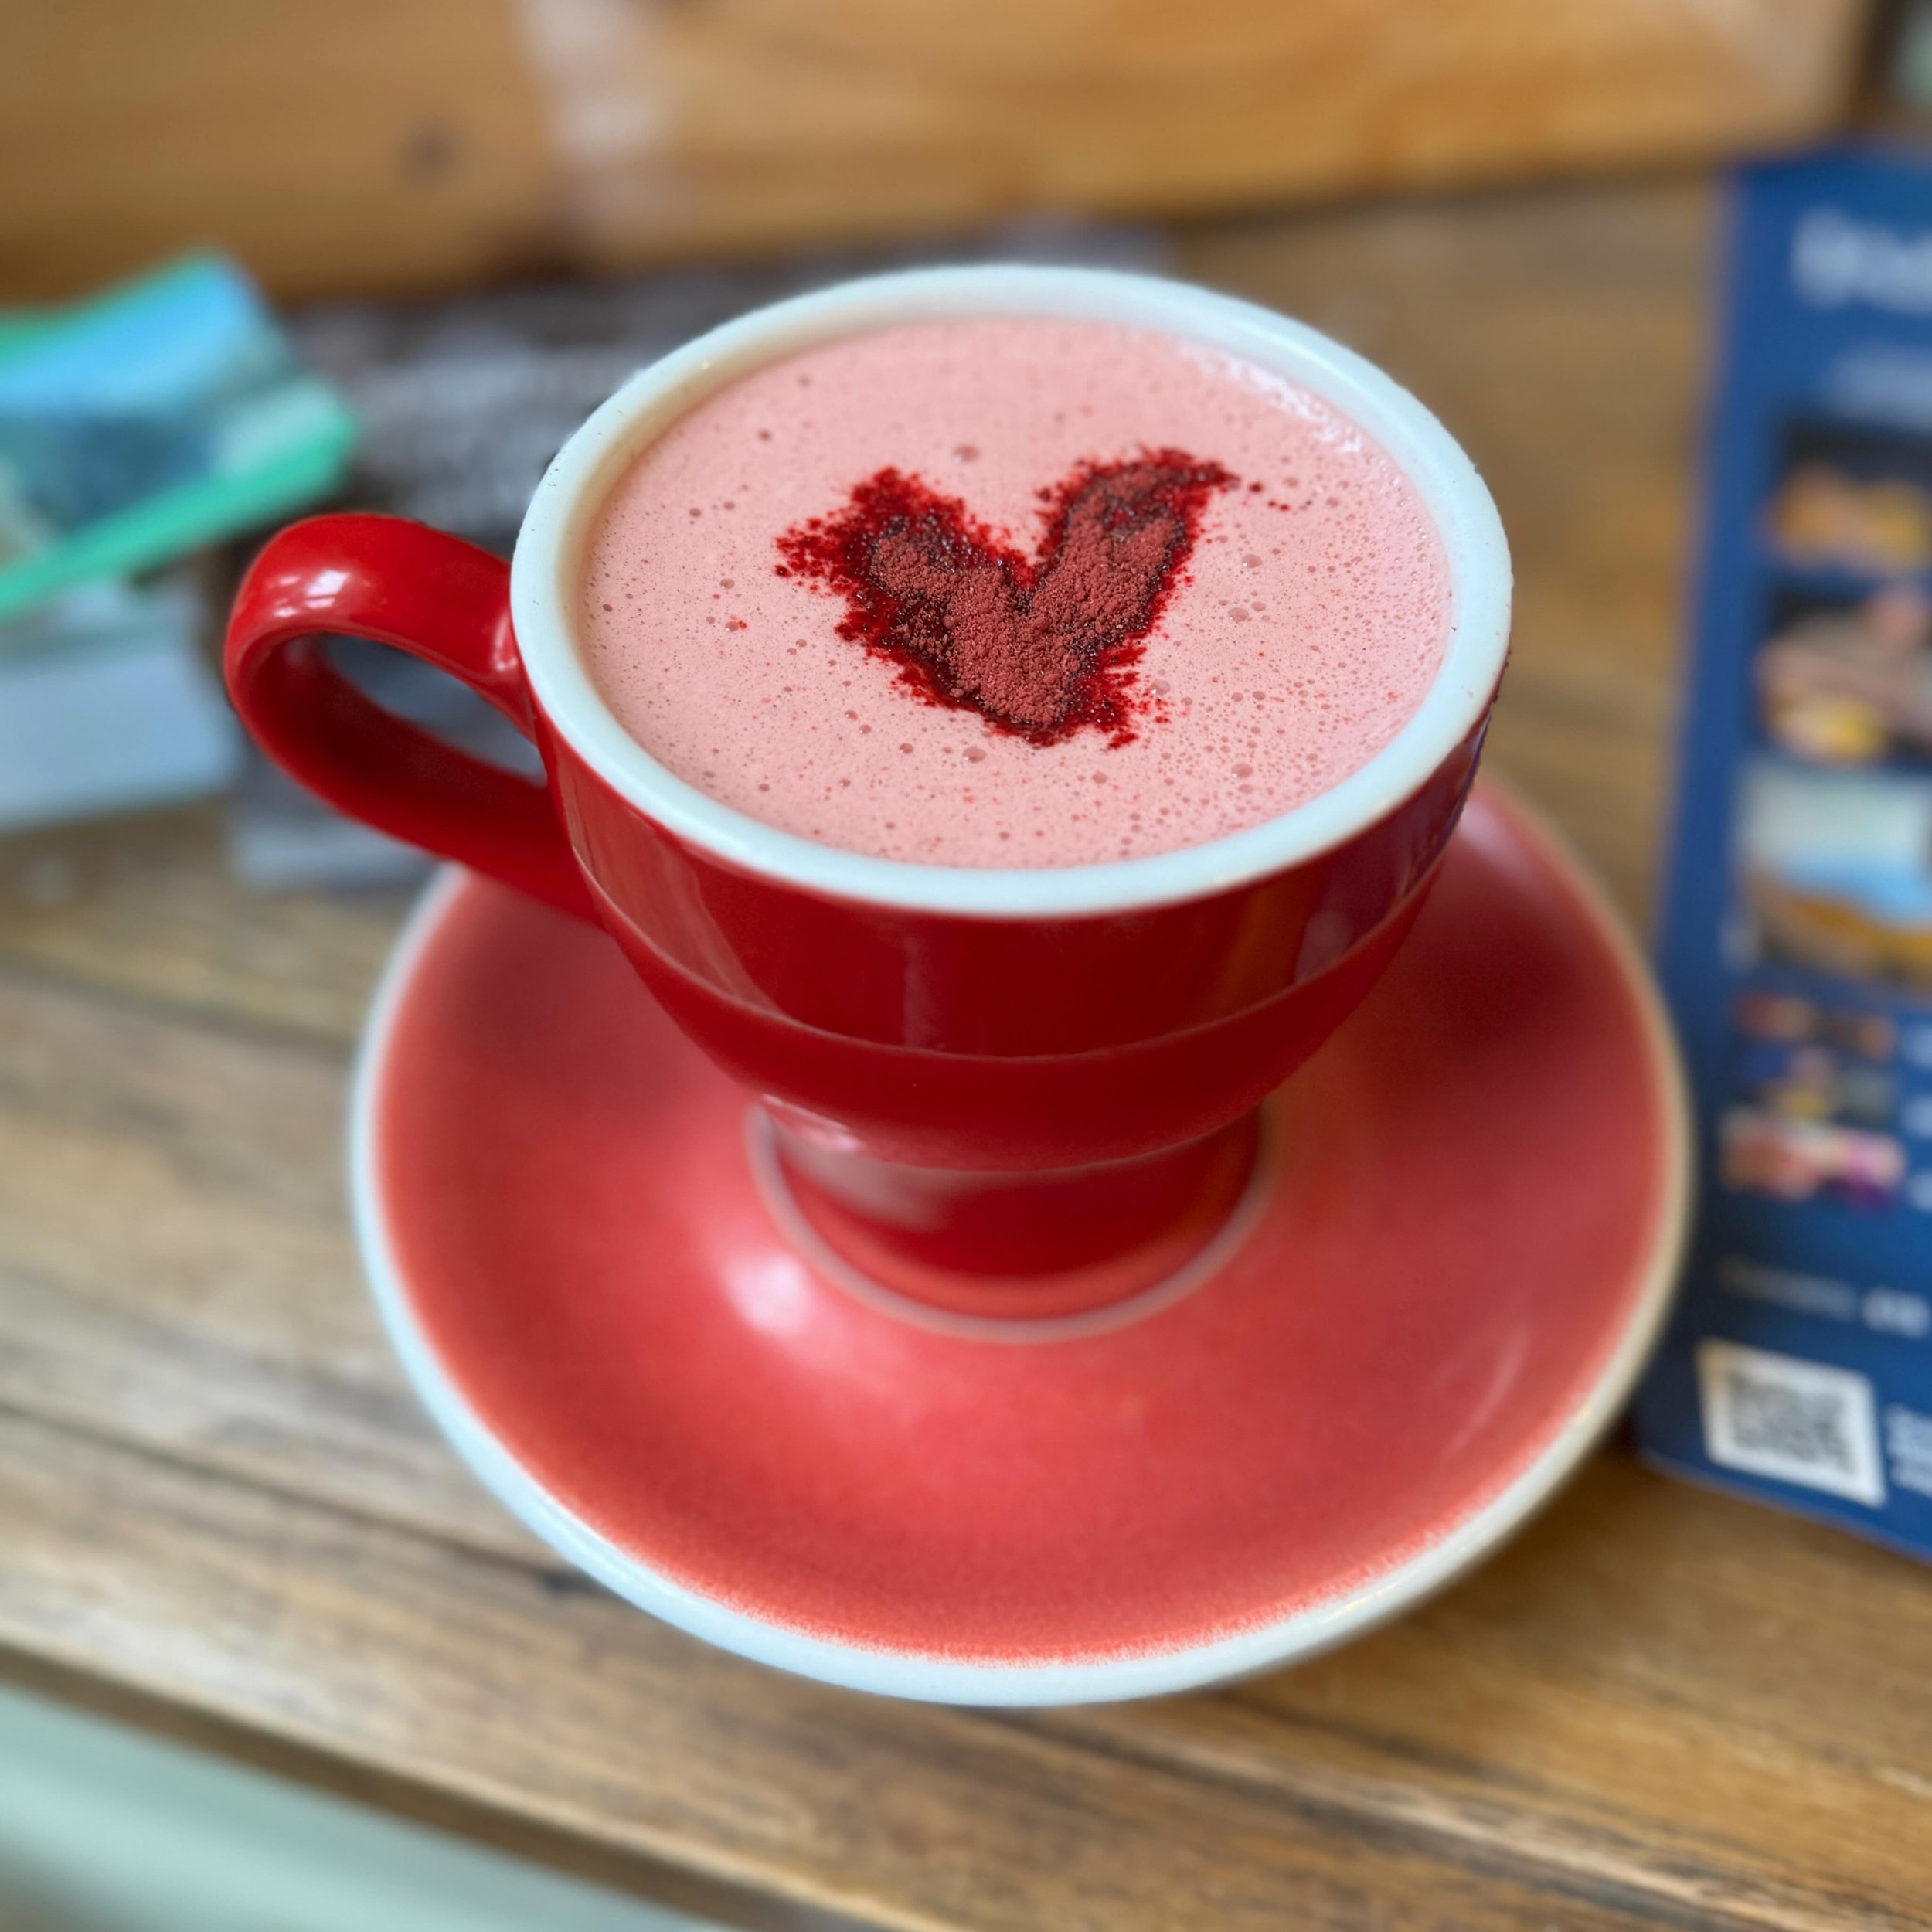 Beetroot &amp; Ginger Latte ❤️✨ ~ One of the latest editions to our menu is this pink powerhouse! The best way to boost your day. Available to have in or takeout. 

#cobblesandclay #cobblesandclayhaworth #beetrootlatte #beetroot #beetrootandgingerlat